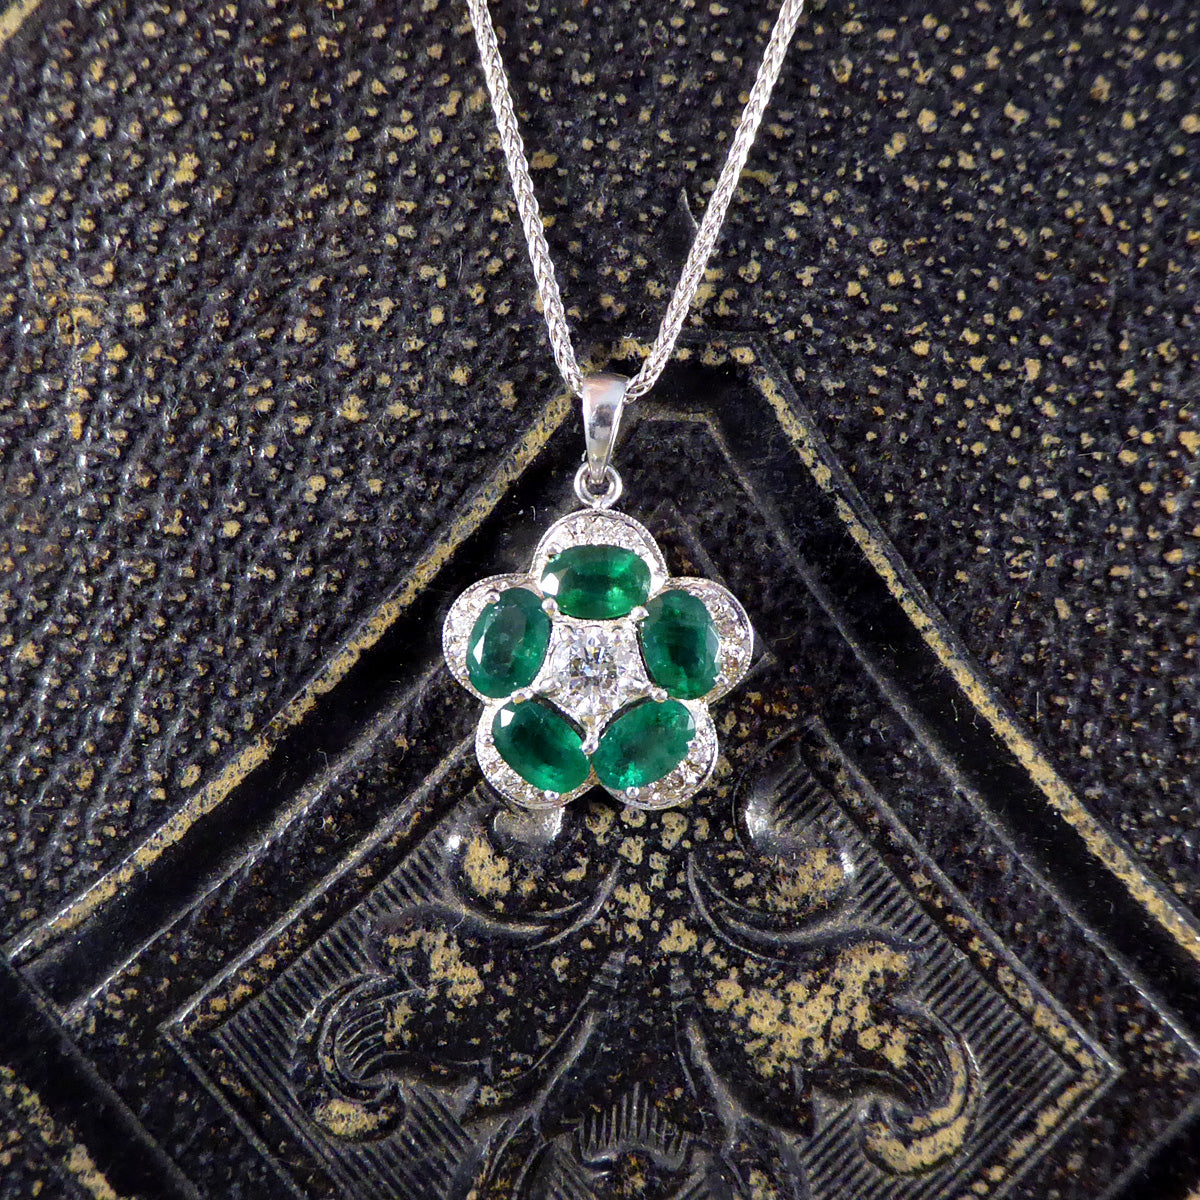 Emerald and Diamond Flower Cluster Pendant in 14ct White Gold with 18ct White Gold Chain Necklace